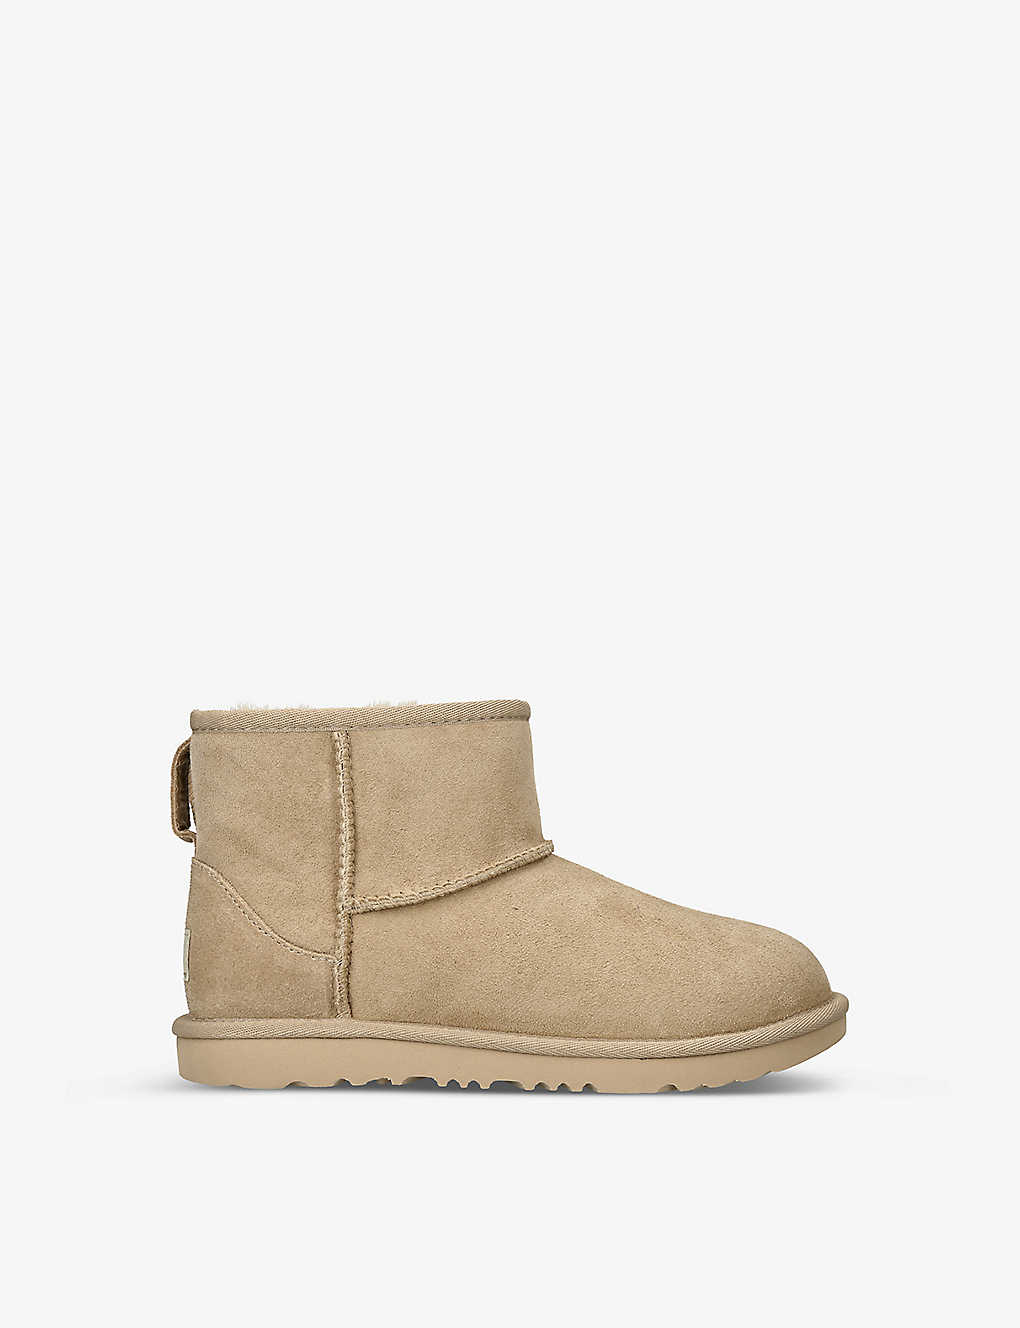 Shop Ugg Girls Bone Kids Classic Mini Ii Suede And Shearling Ankle Boots 7-9 Years